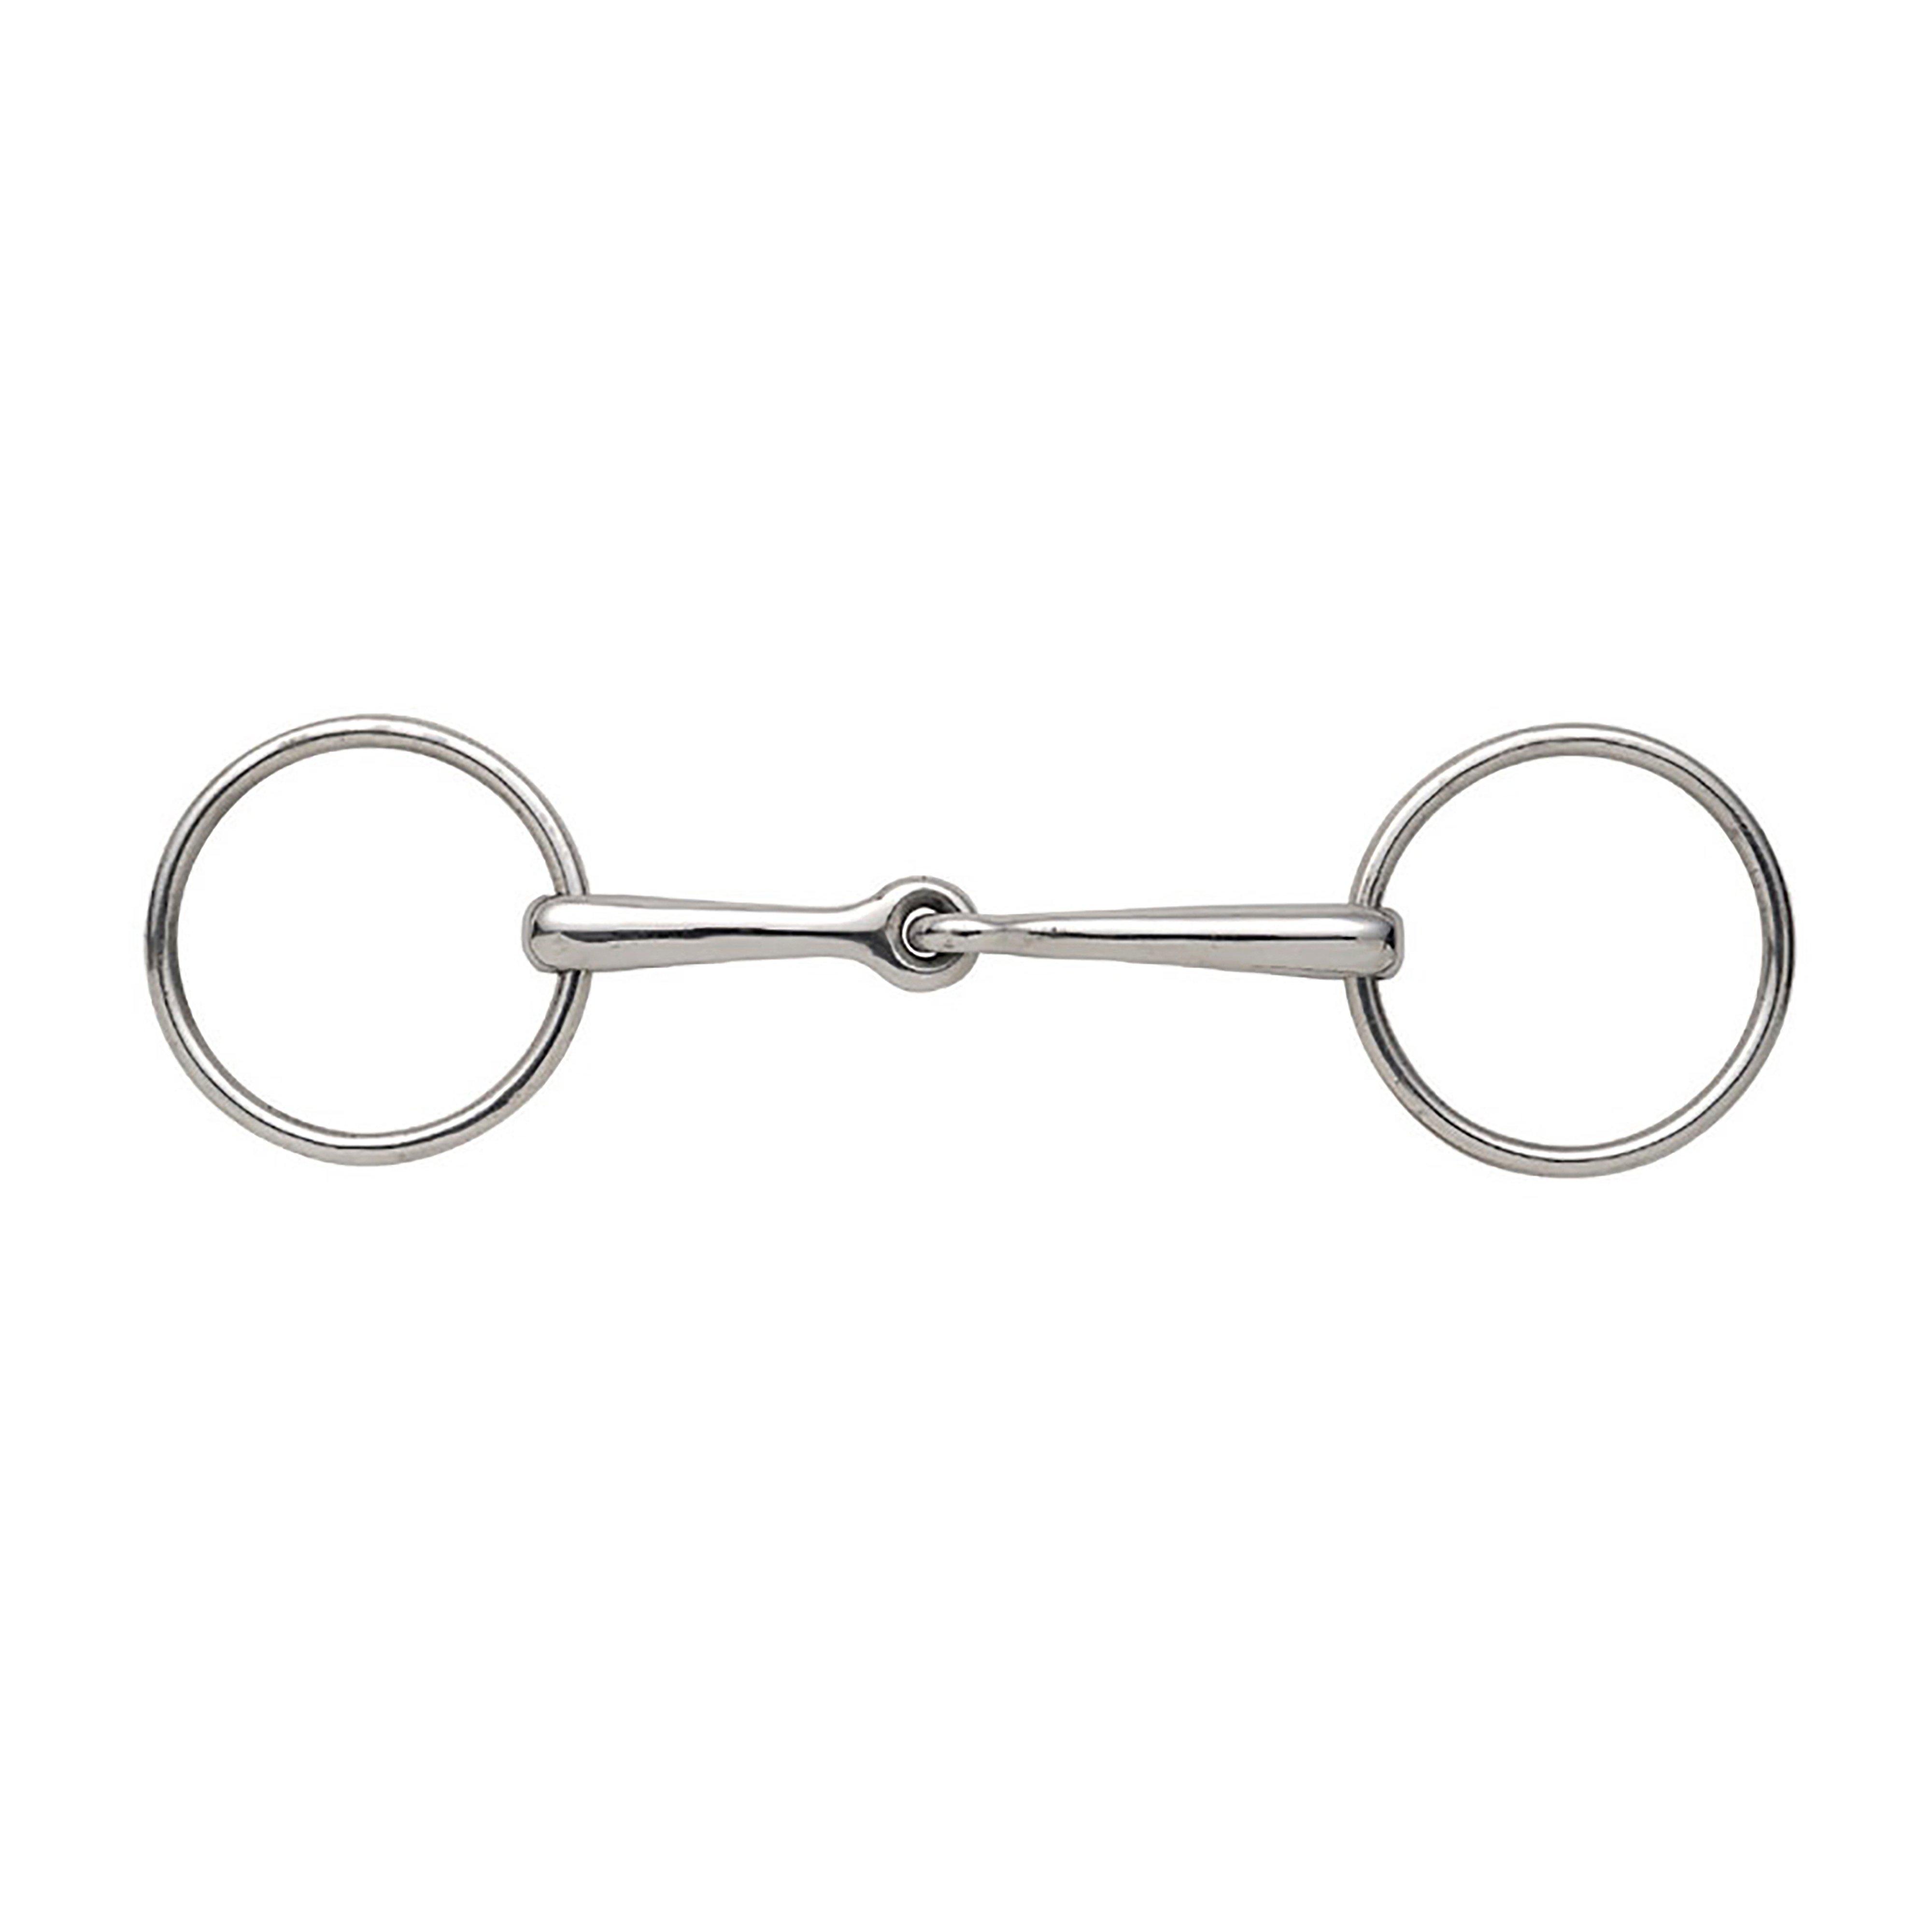 Jointed Mouth Loose Ring Snaffle